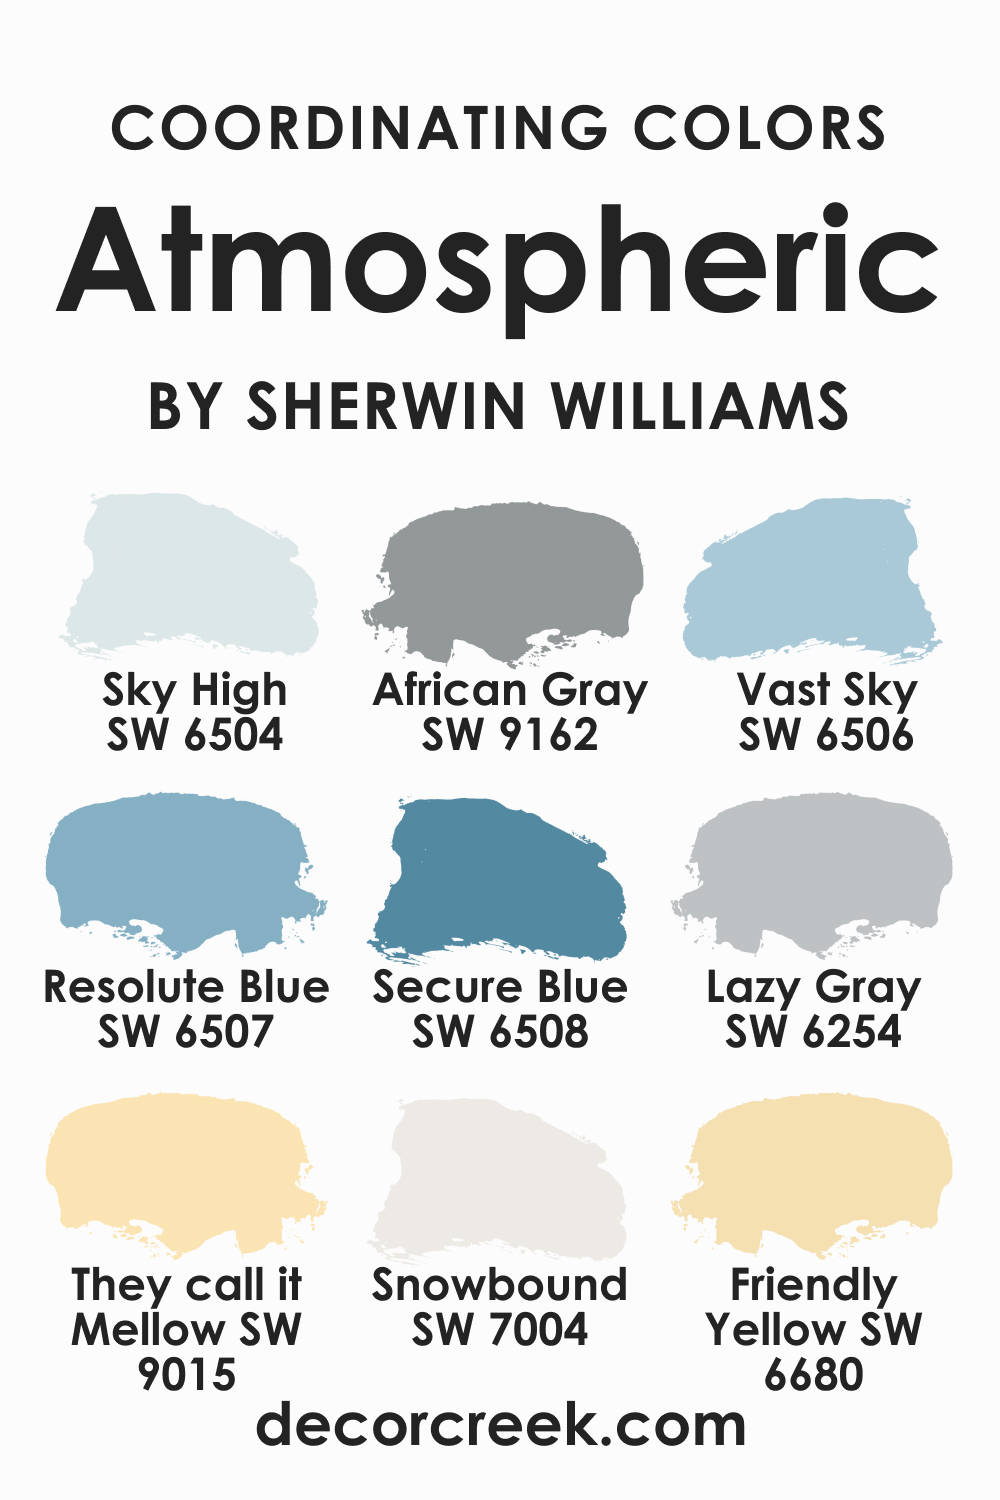 SW Atmospheric Coordinating Colors